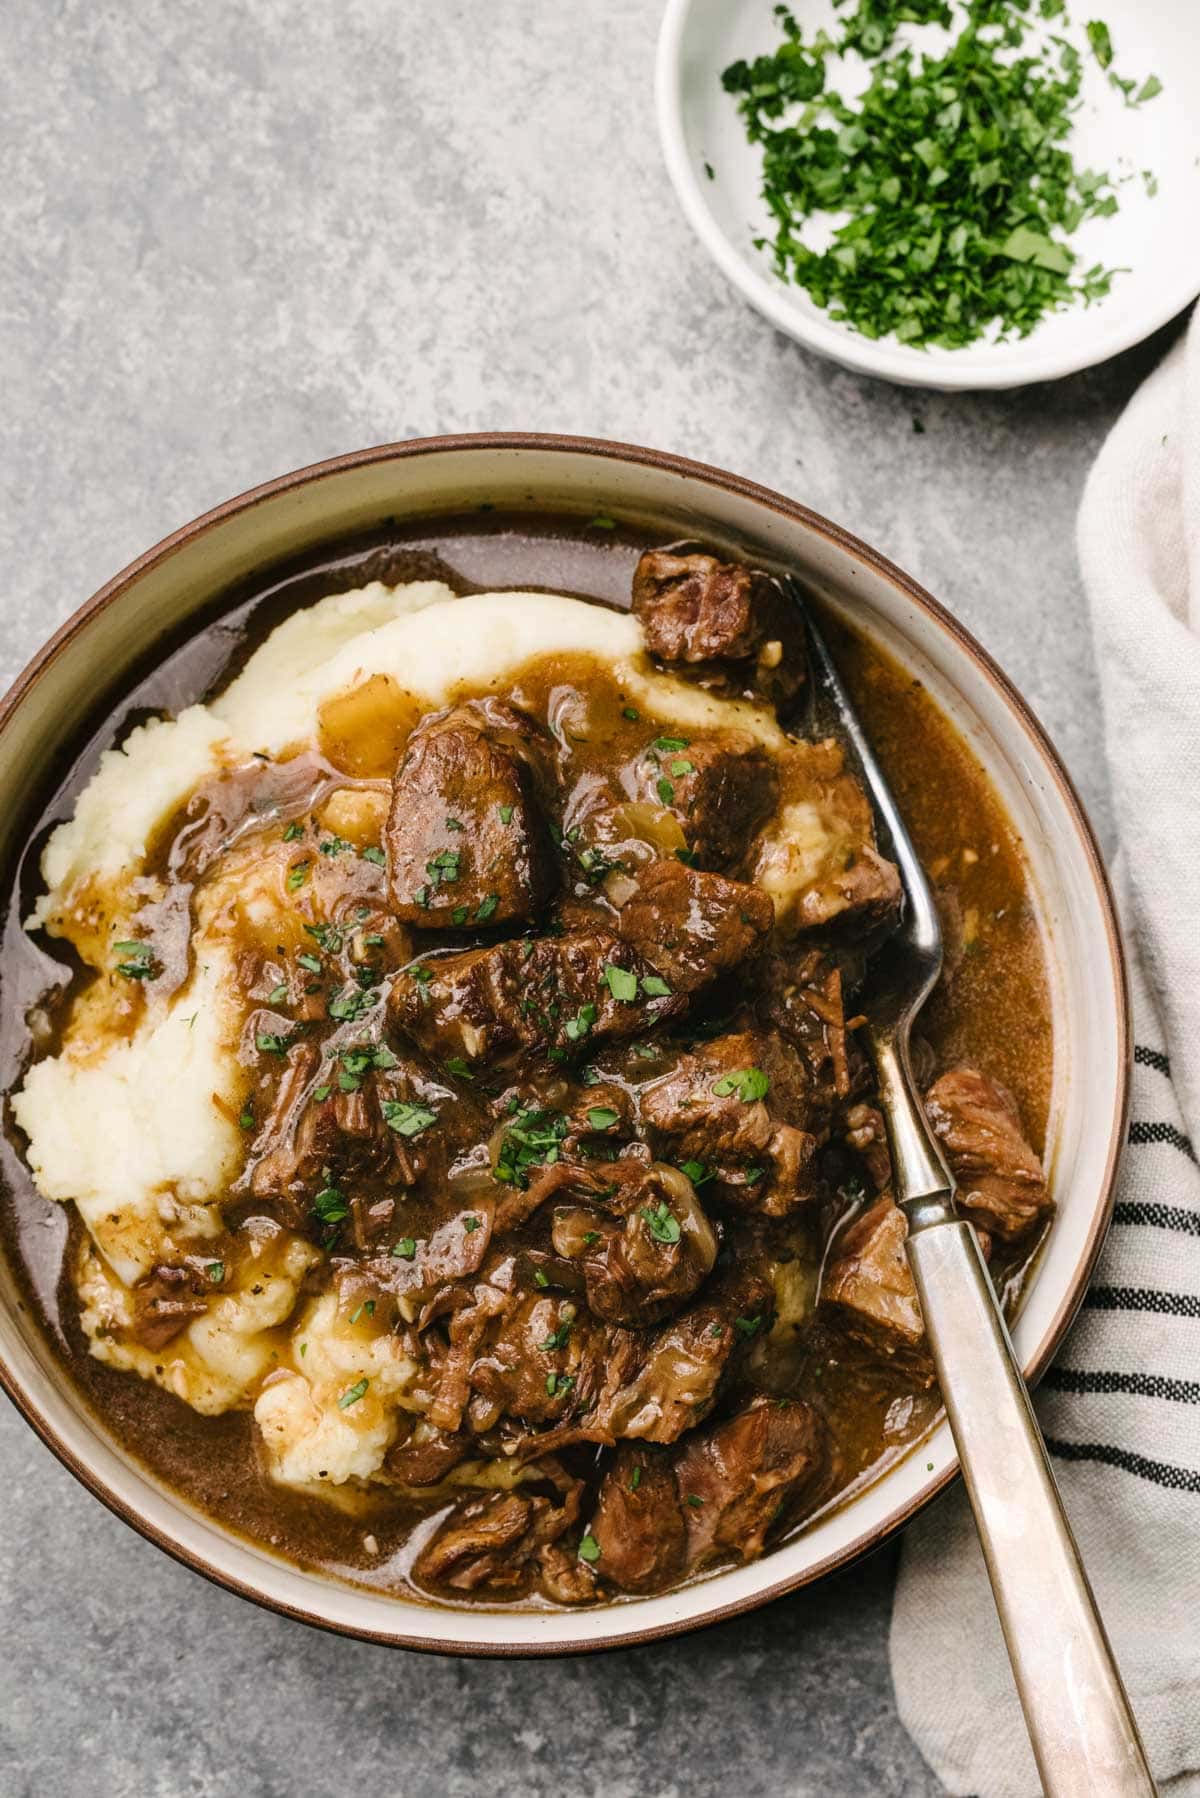 A fork tucked into tender Instant Pot beef tips over mashed potatoes in a low shallow bowl; the bowl is surrounded by a striped linen napkin and small bowl of chopped fresh parsley.